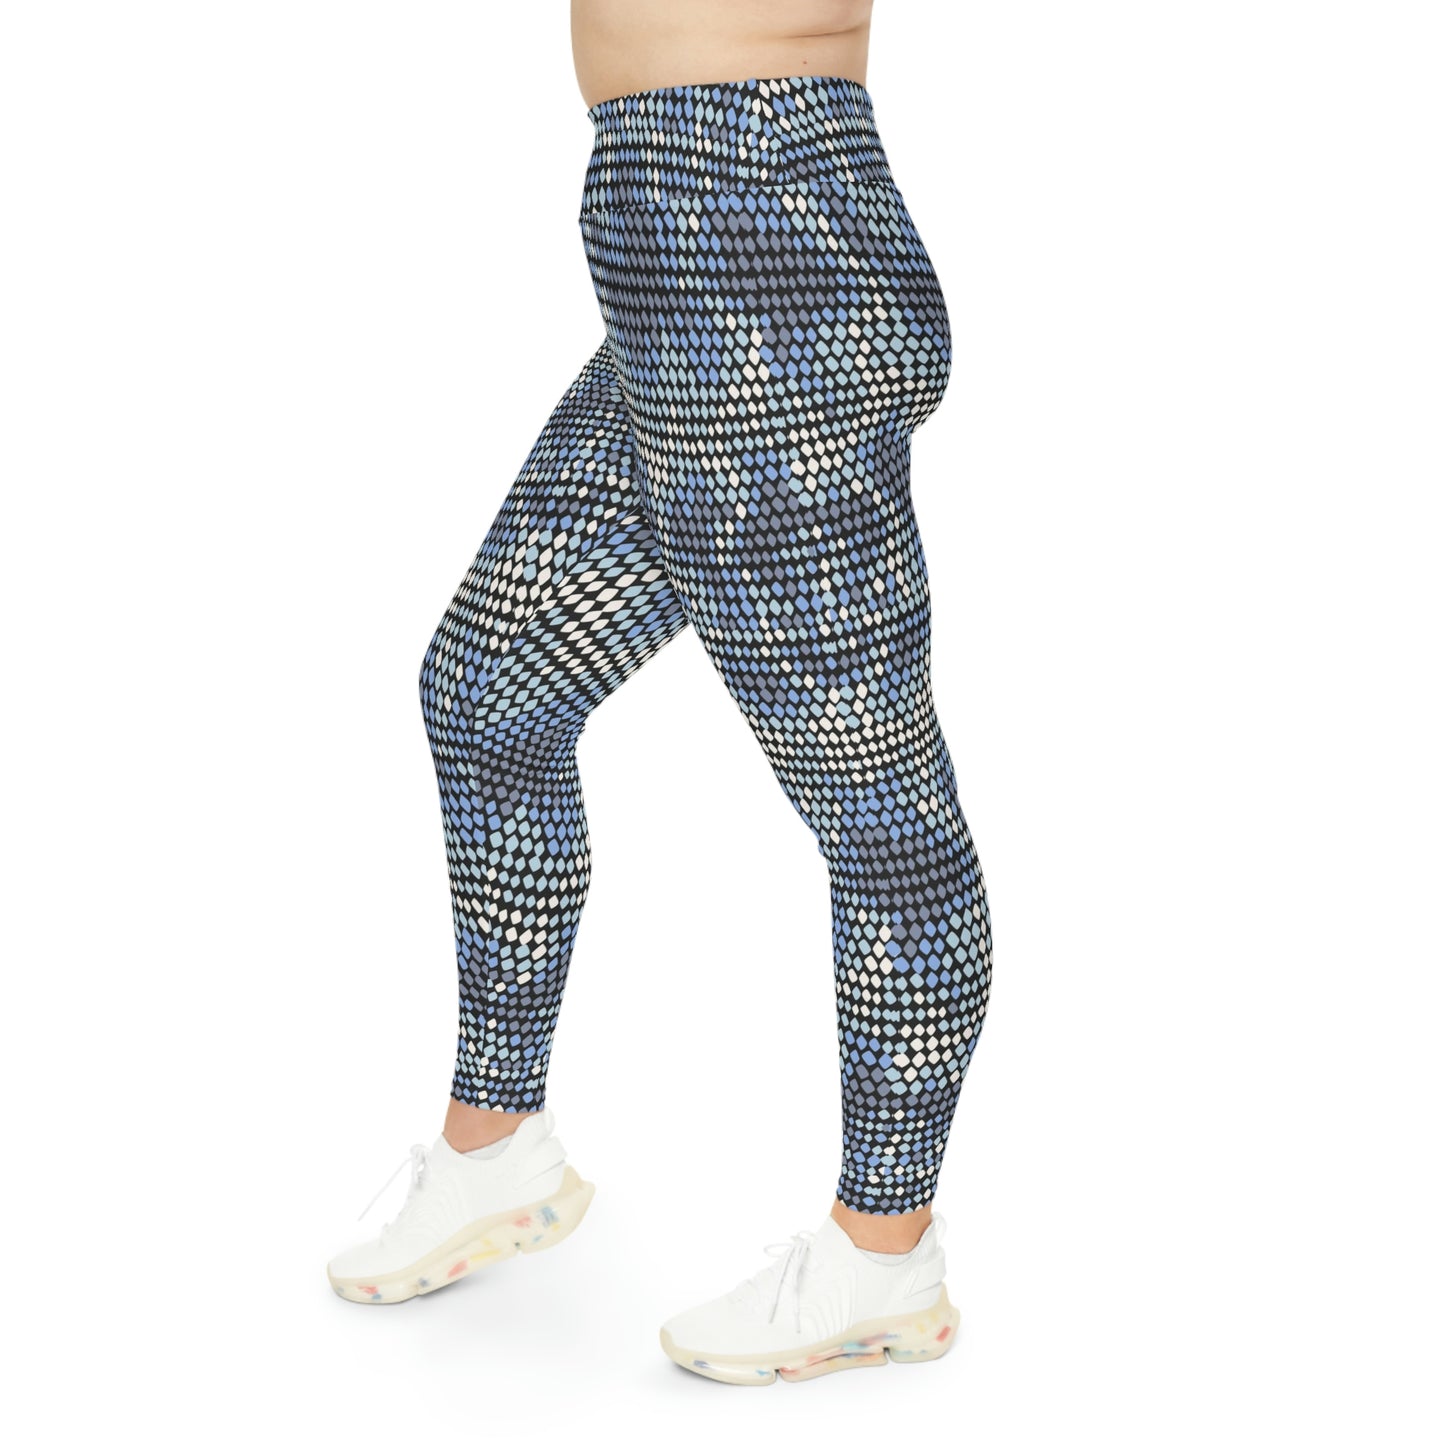 Snake animal kingdom, Safari Plus Size Leggings, One of a Kind Gift - Unique Workout Activewear tights for Wife, Girlfriend, Mothers Day Gift